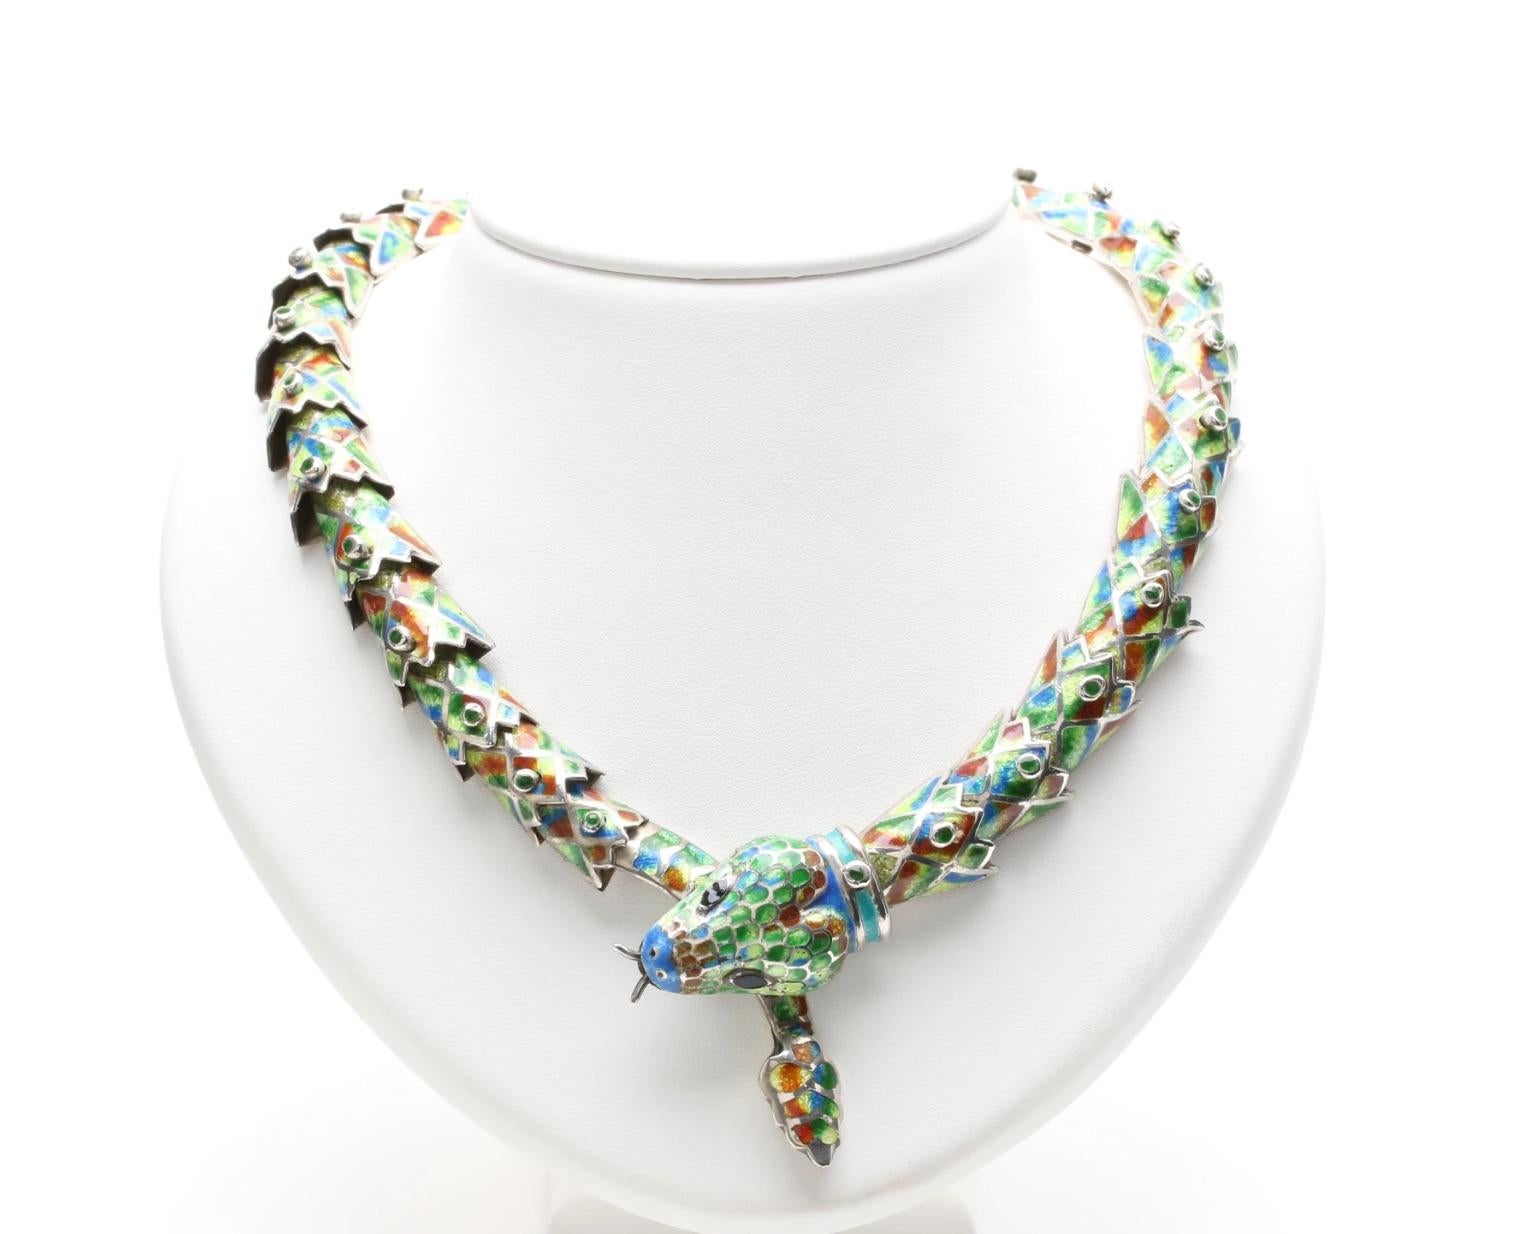 This stunning vintage snake necklace finely crafted by Mexico Maestro Melesio Rodriguez for Margot de Taxco, showcases a 925 silver enhanced with rich enamel inlays. The articulated 32 panel piece boasts a fabulous three dimensional depth with